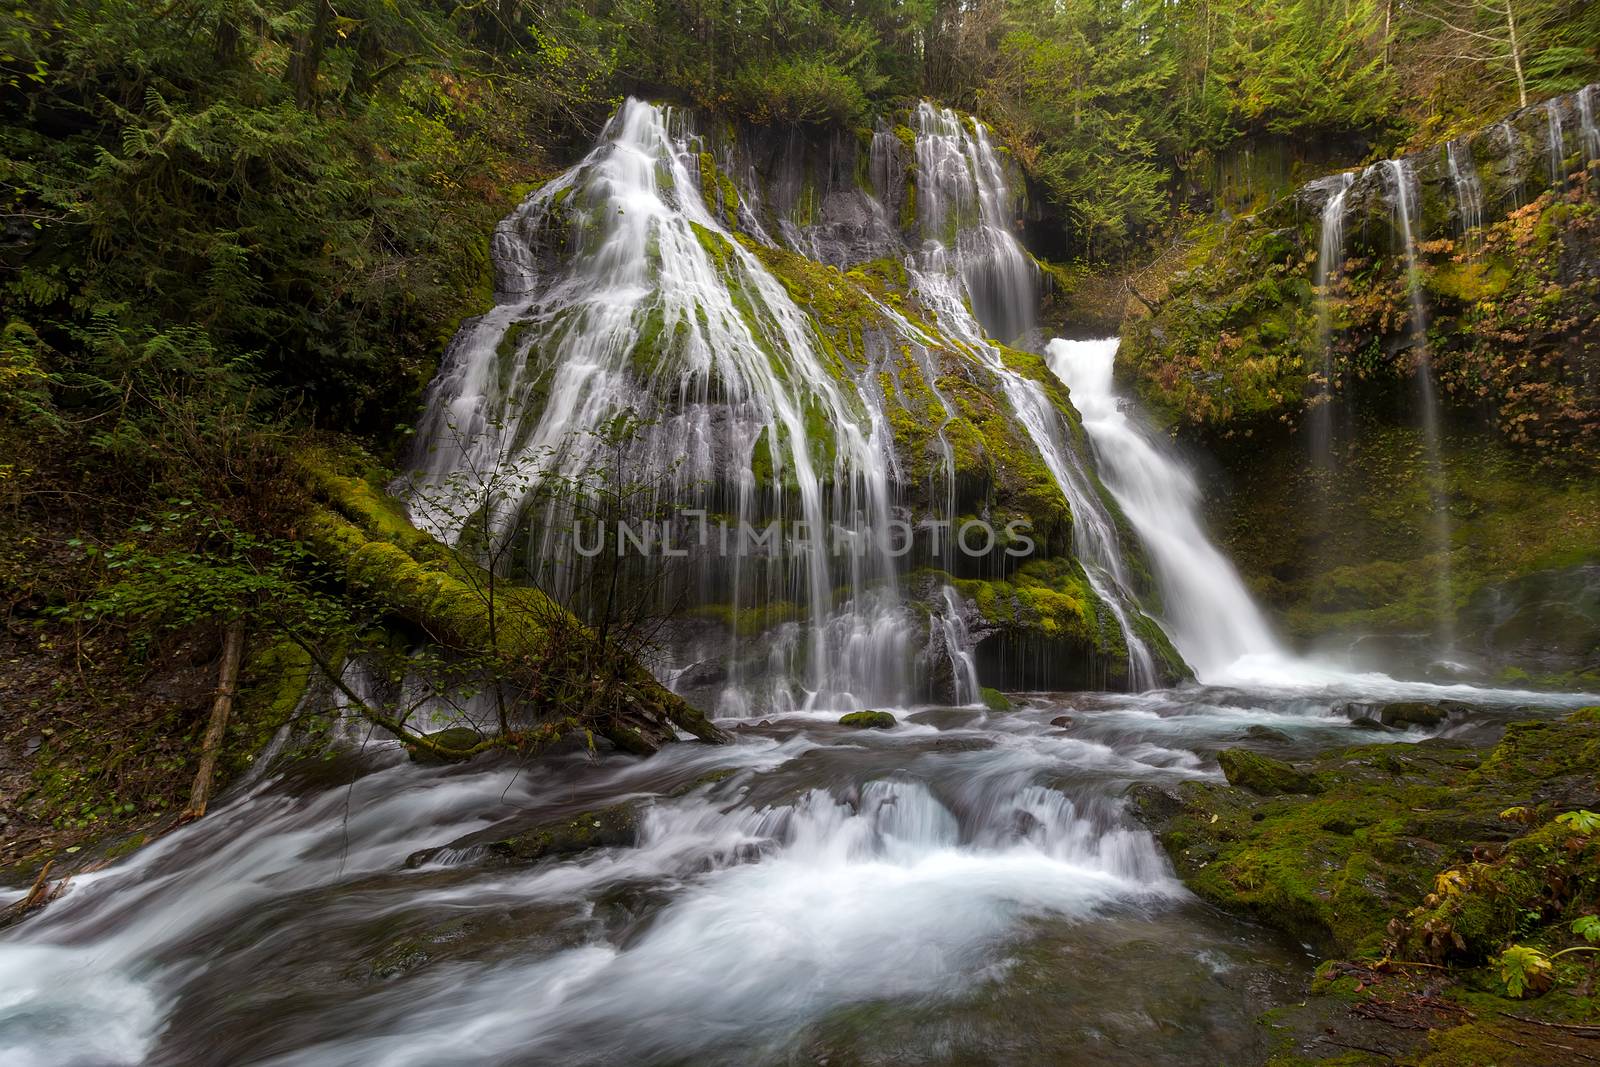 Panther Creek in Gifford Pinchot National Forest by jpldesigns